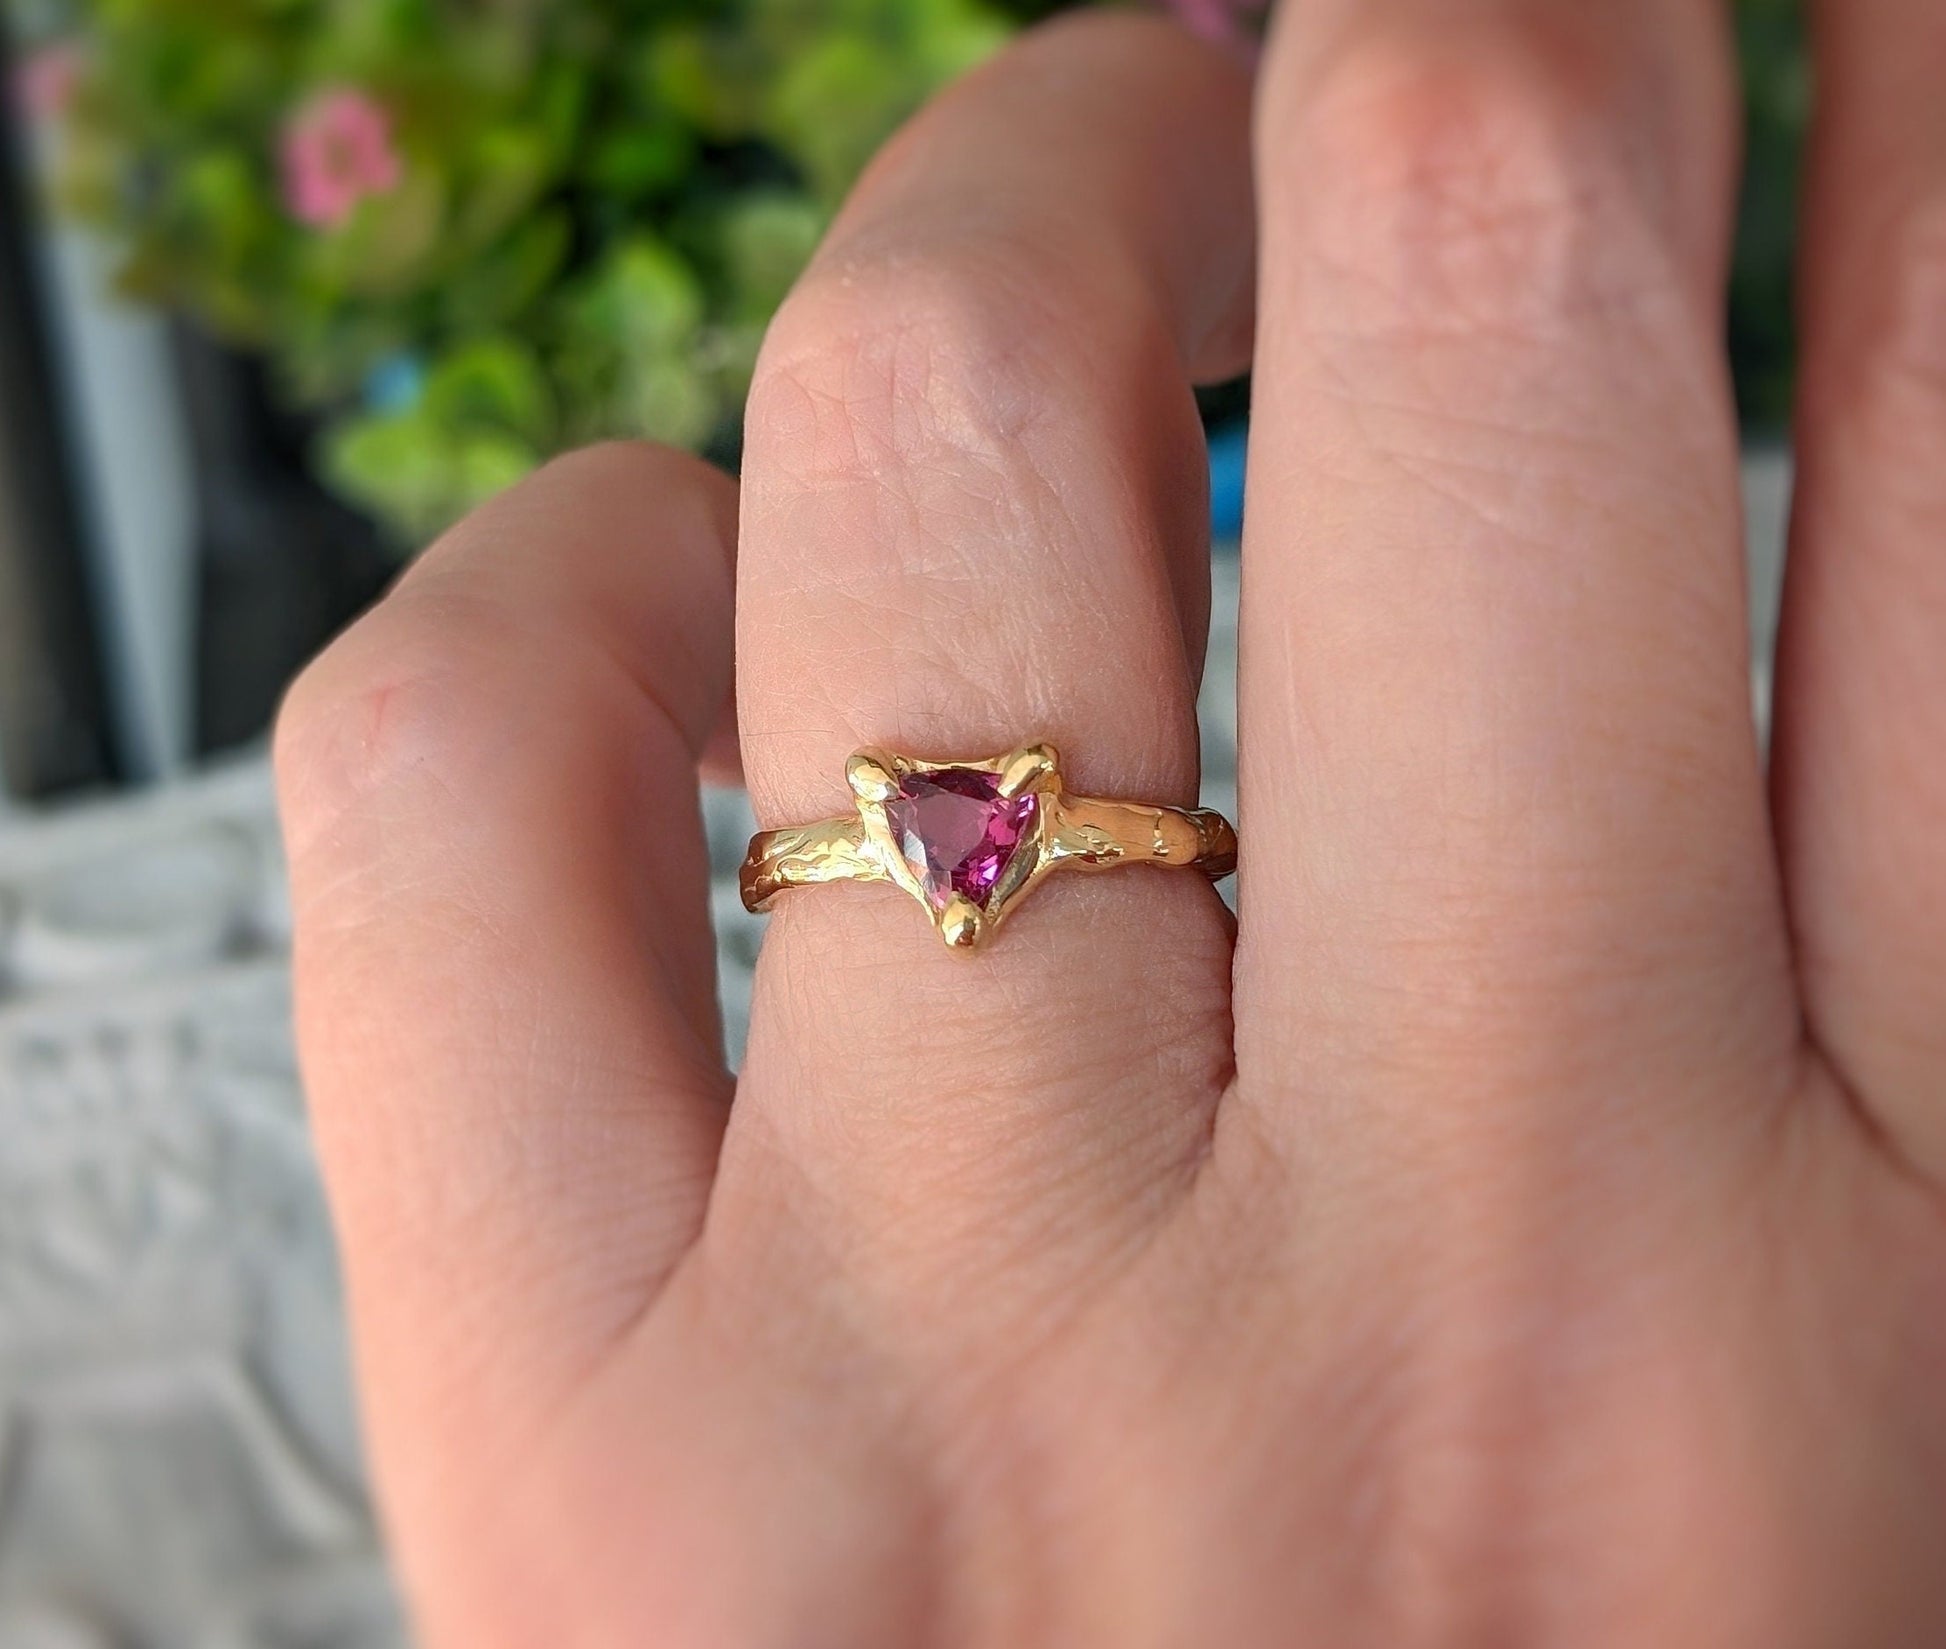 Hand with a Trilliant shape Rubellite Tourmaline set by prongs on a textured Solid 14k Gold band